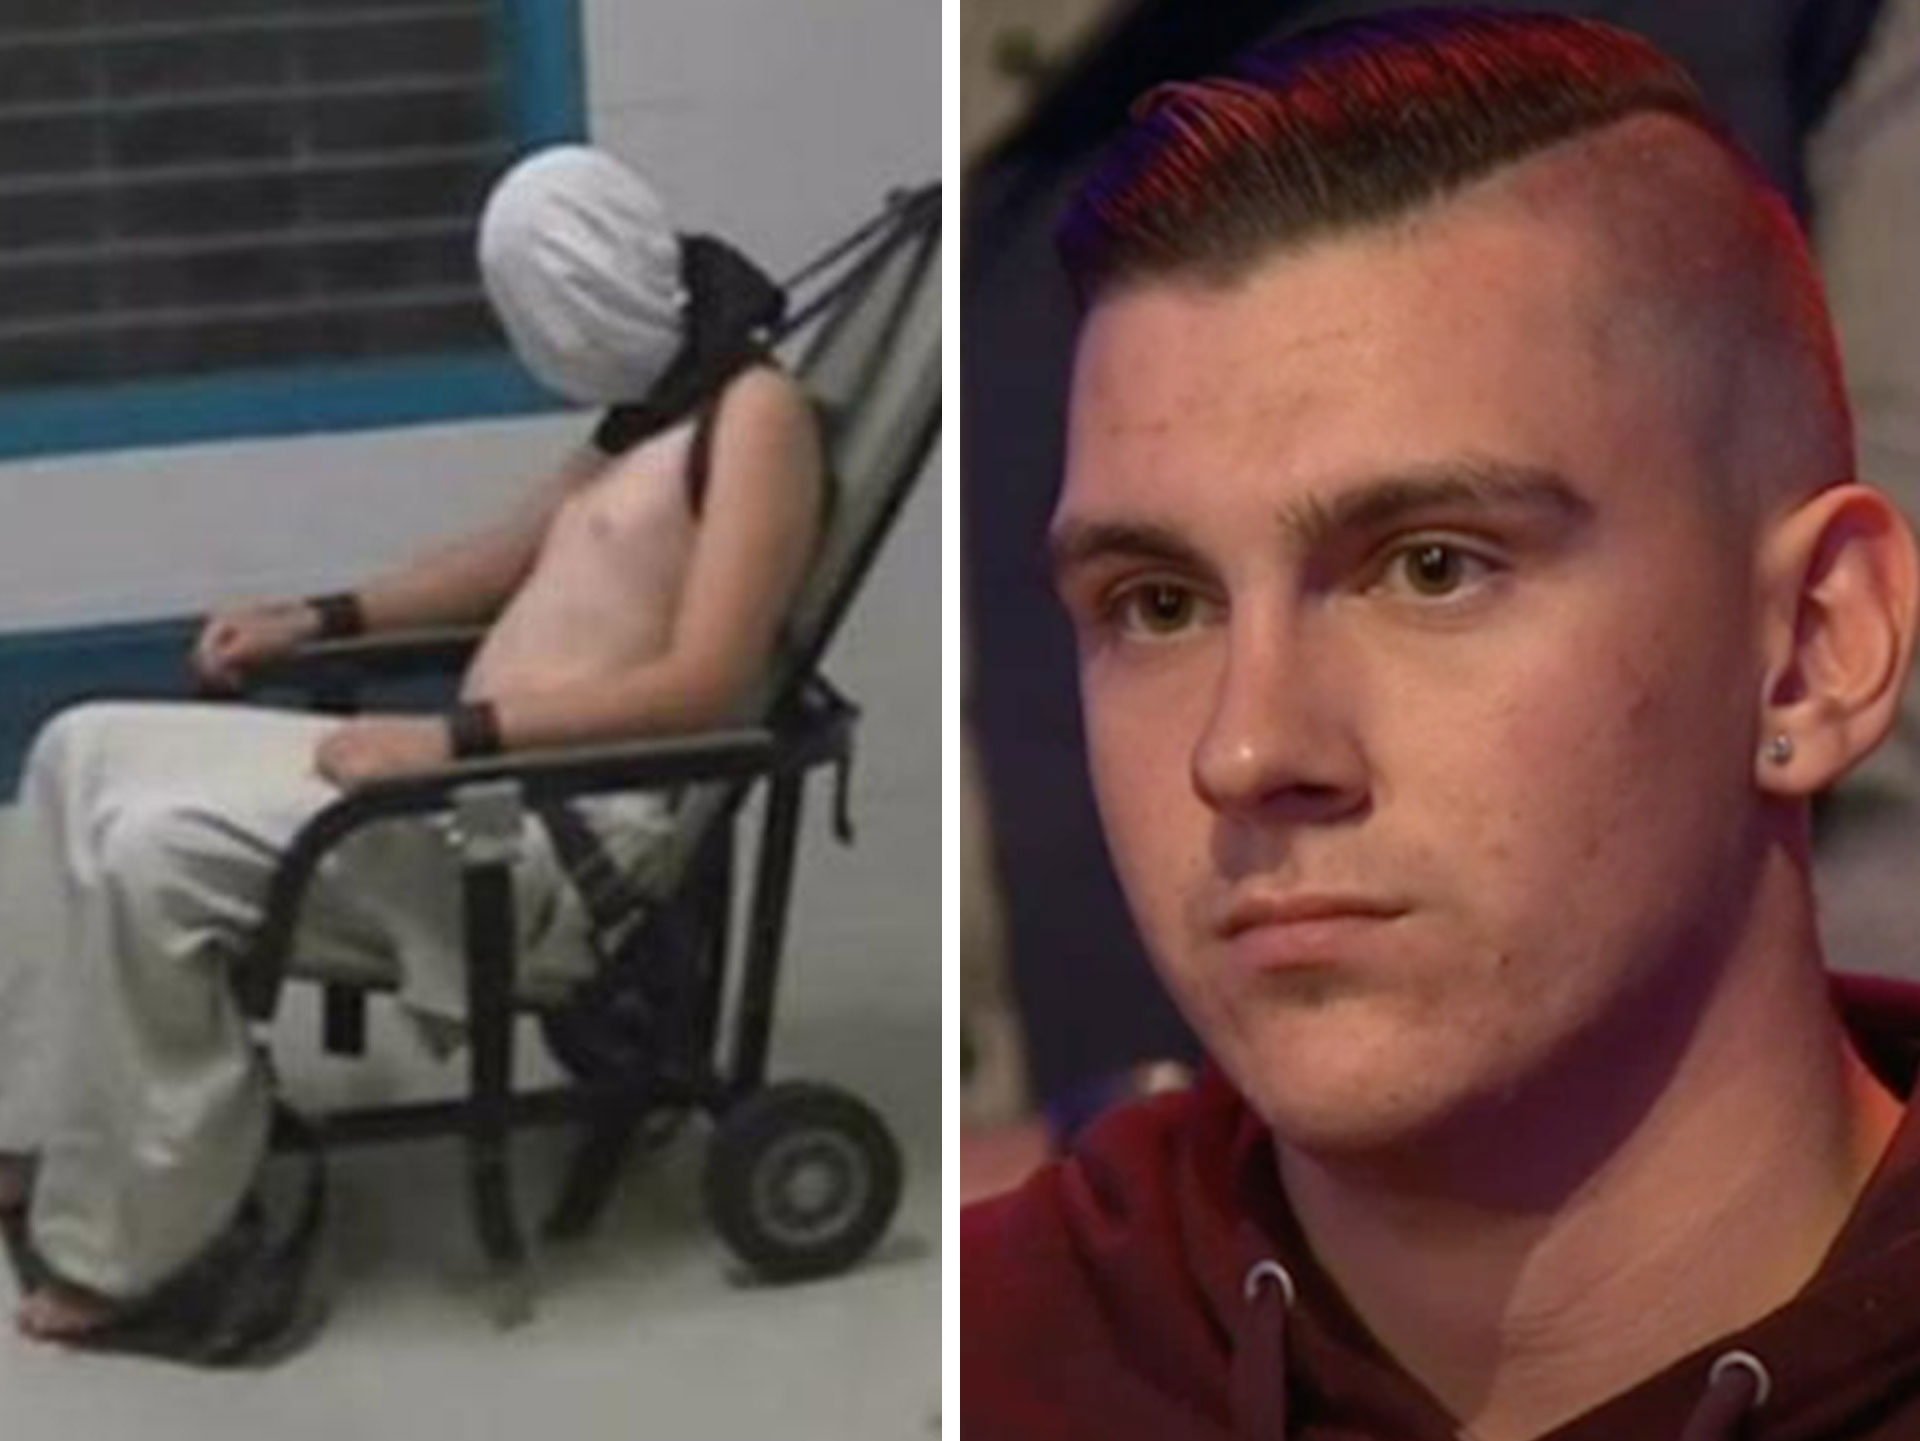 Dylan Voller asks Q&A panel why there’s so little focus on rehabilitation for young offenders